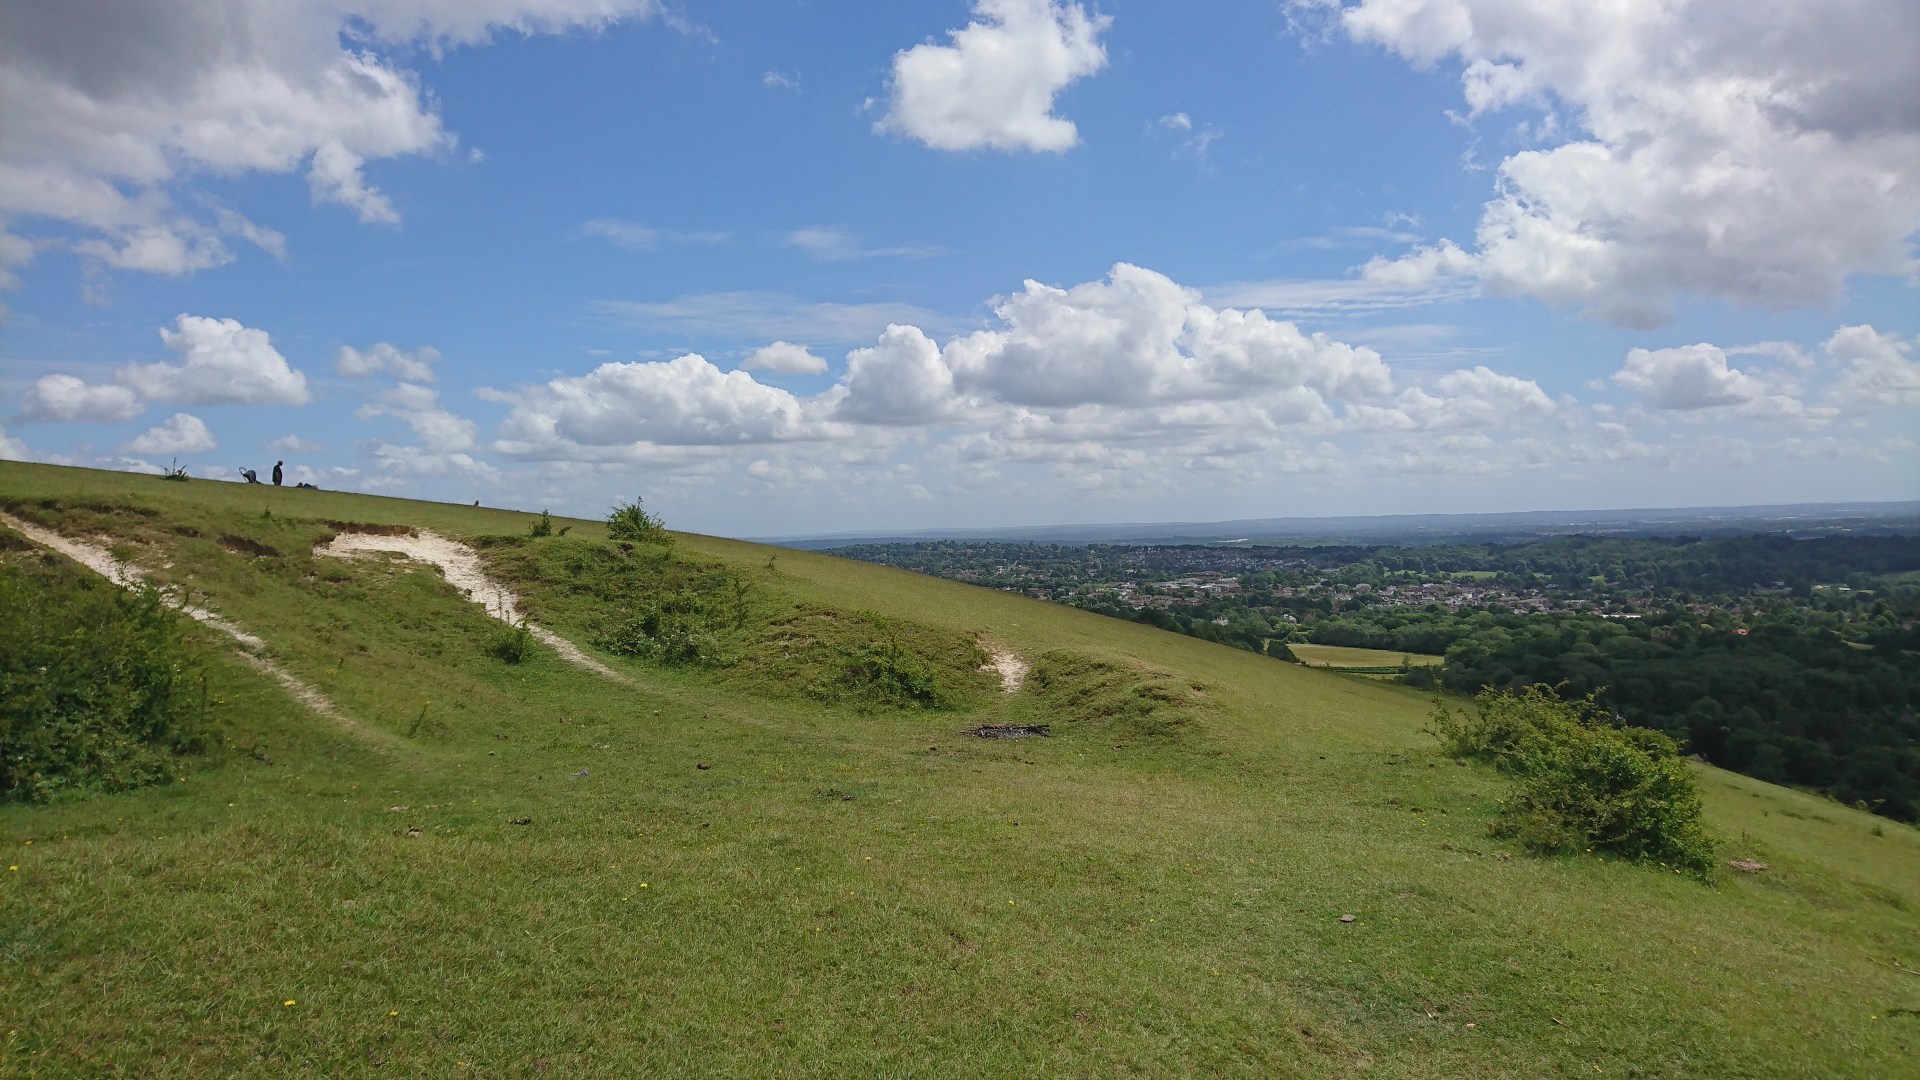 North Downs Way from Merstham to Betchworth via Reigate Hill